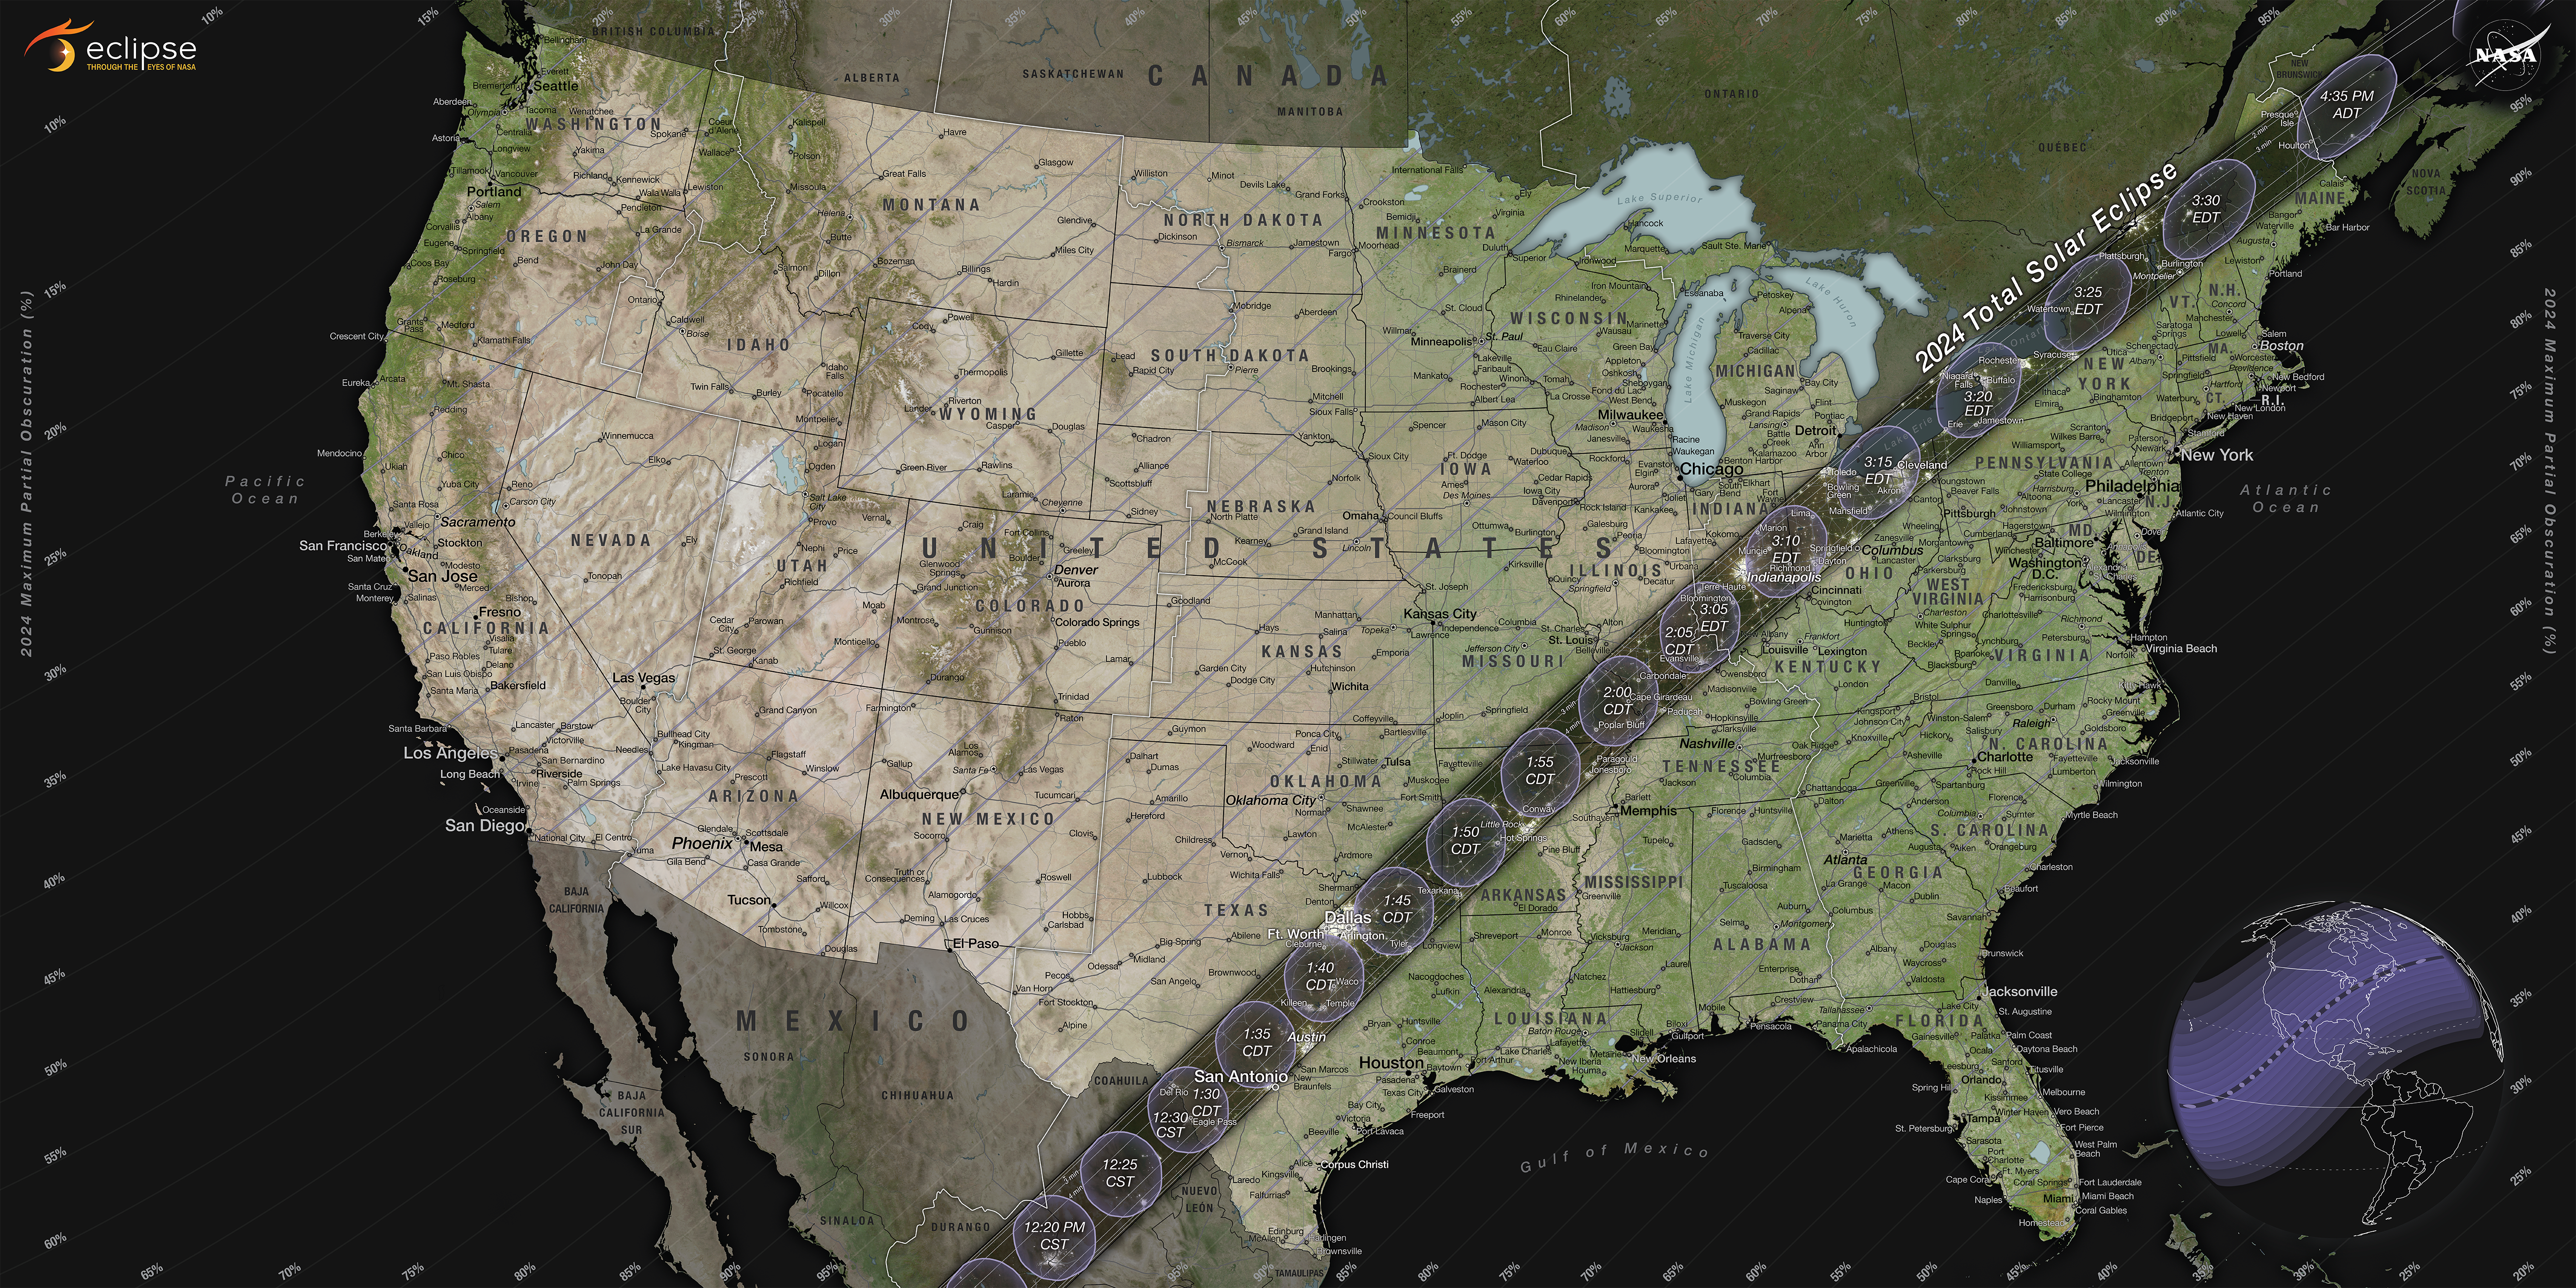 united states map showing path of total eclipse